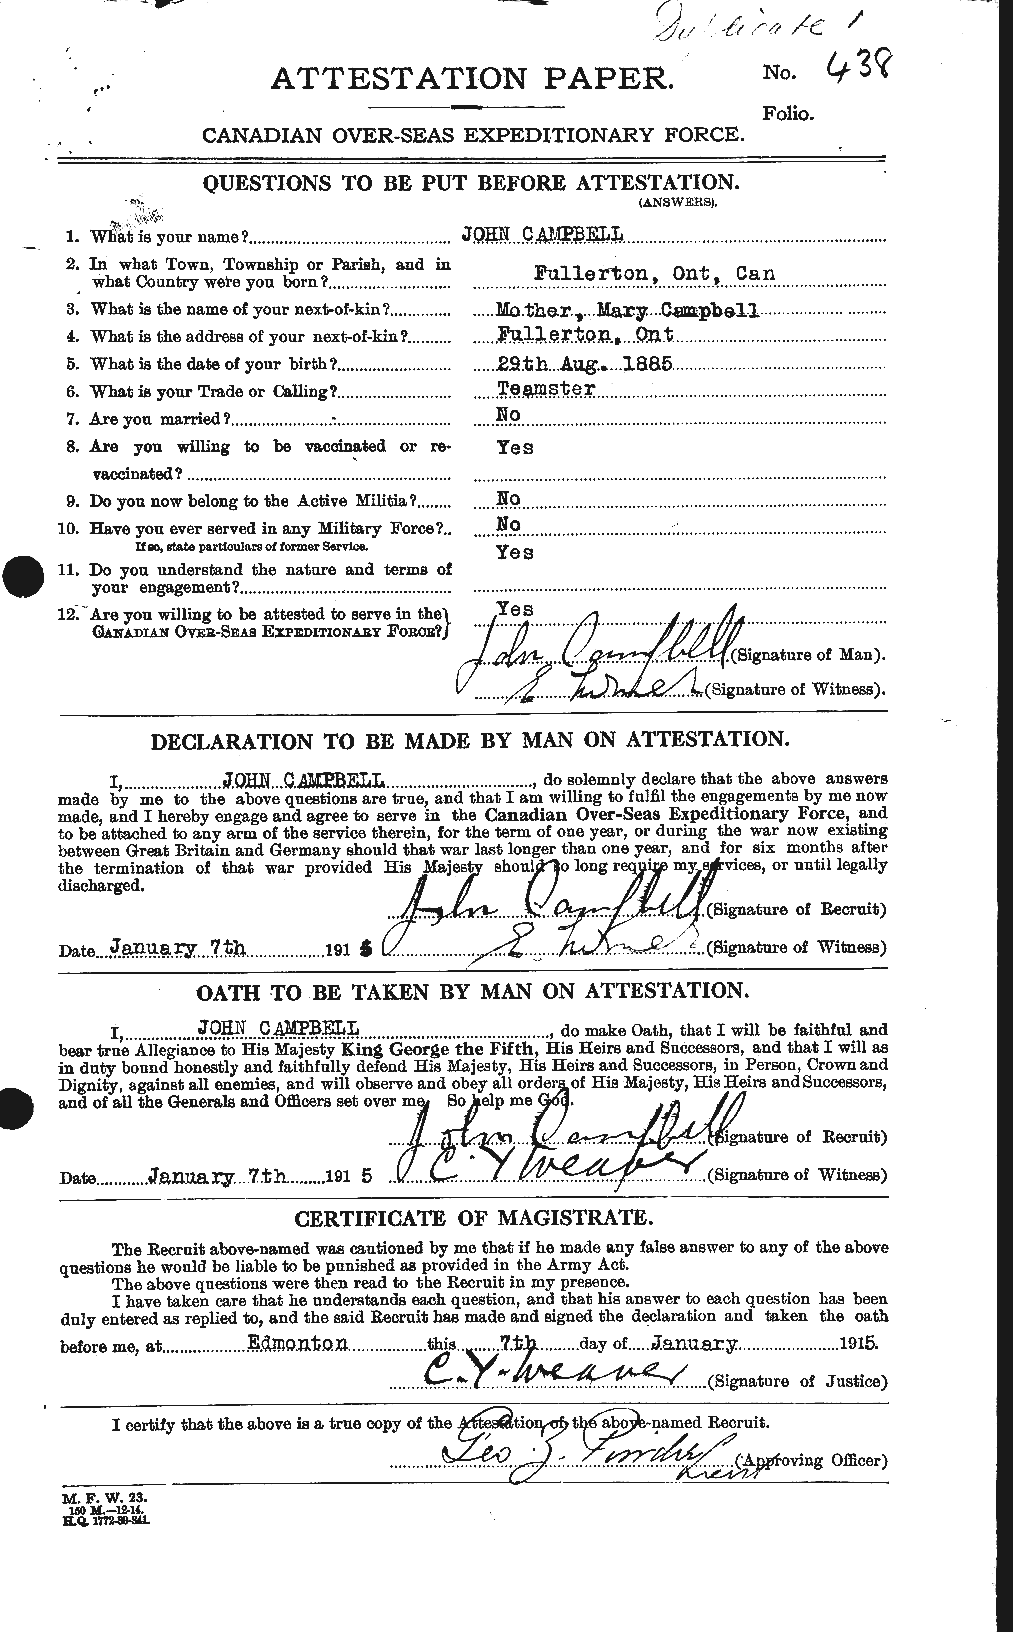 Personnel Records of the First World War - CEF 006798a